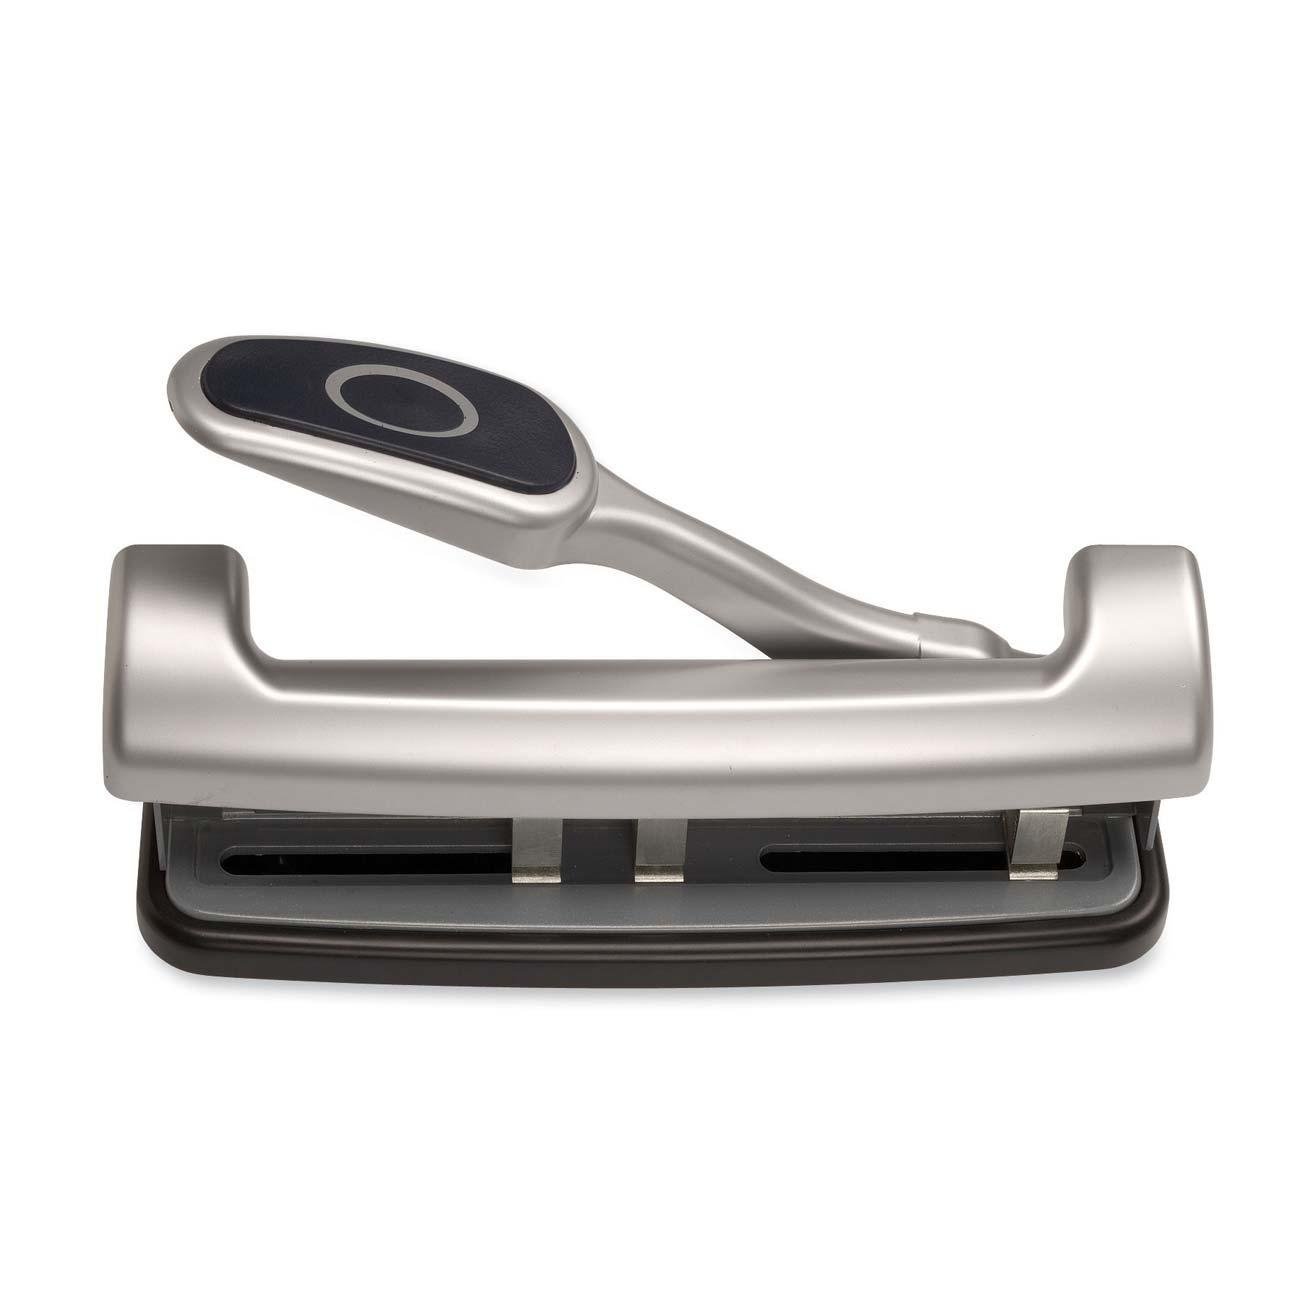 2-3 hole punch with 15-sheet capacity